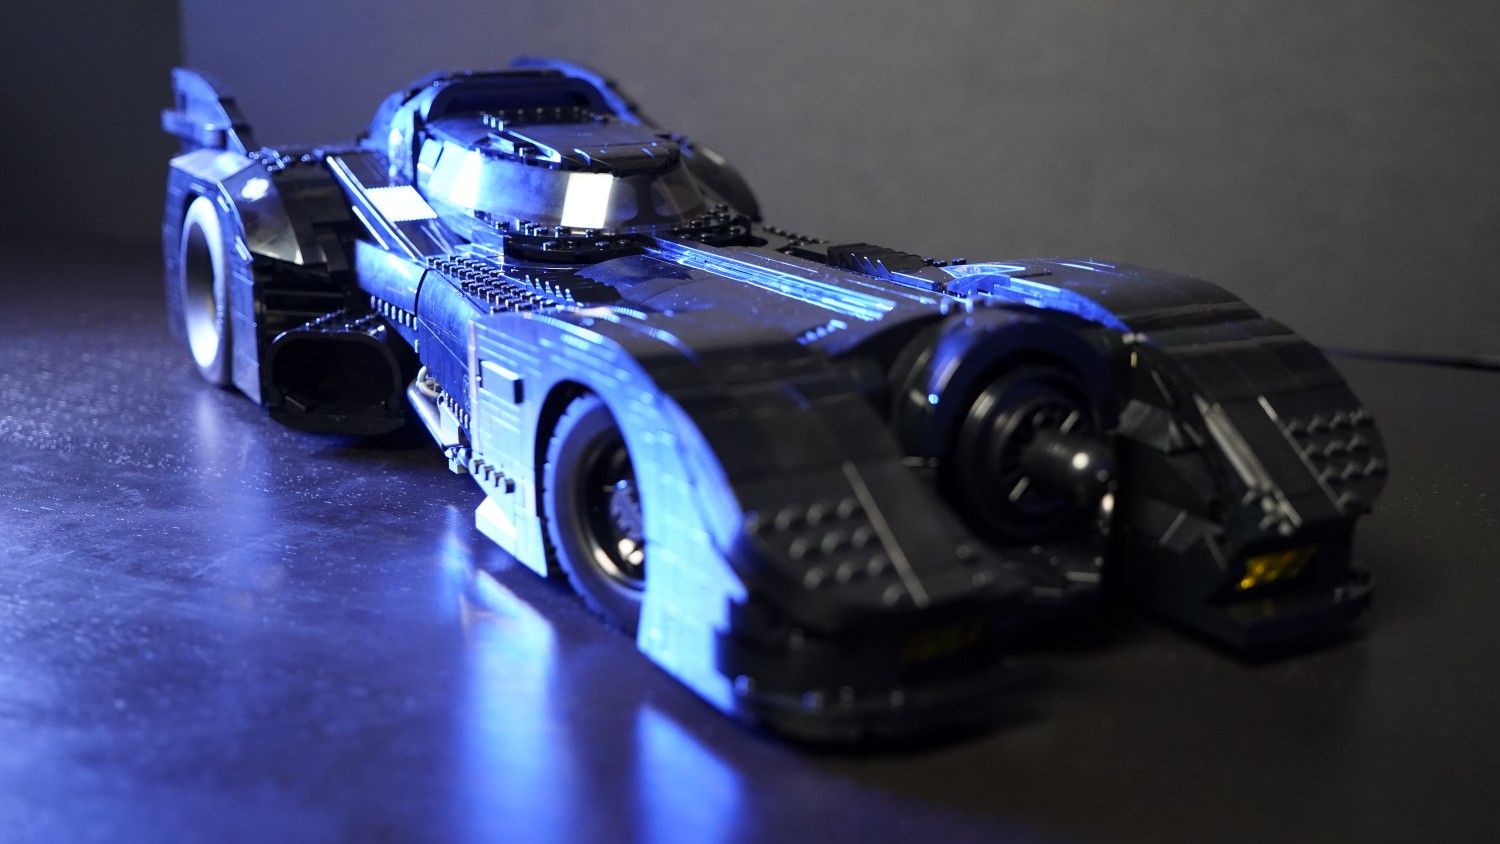 The 76139 LEGO 1989 Batmobile Is Finally In Singapore, It's